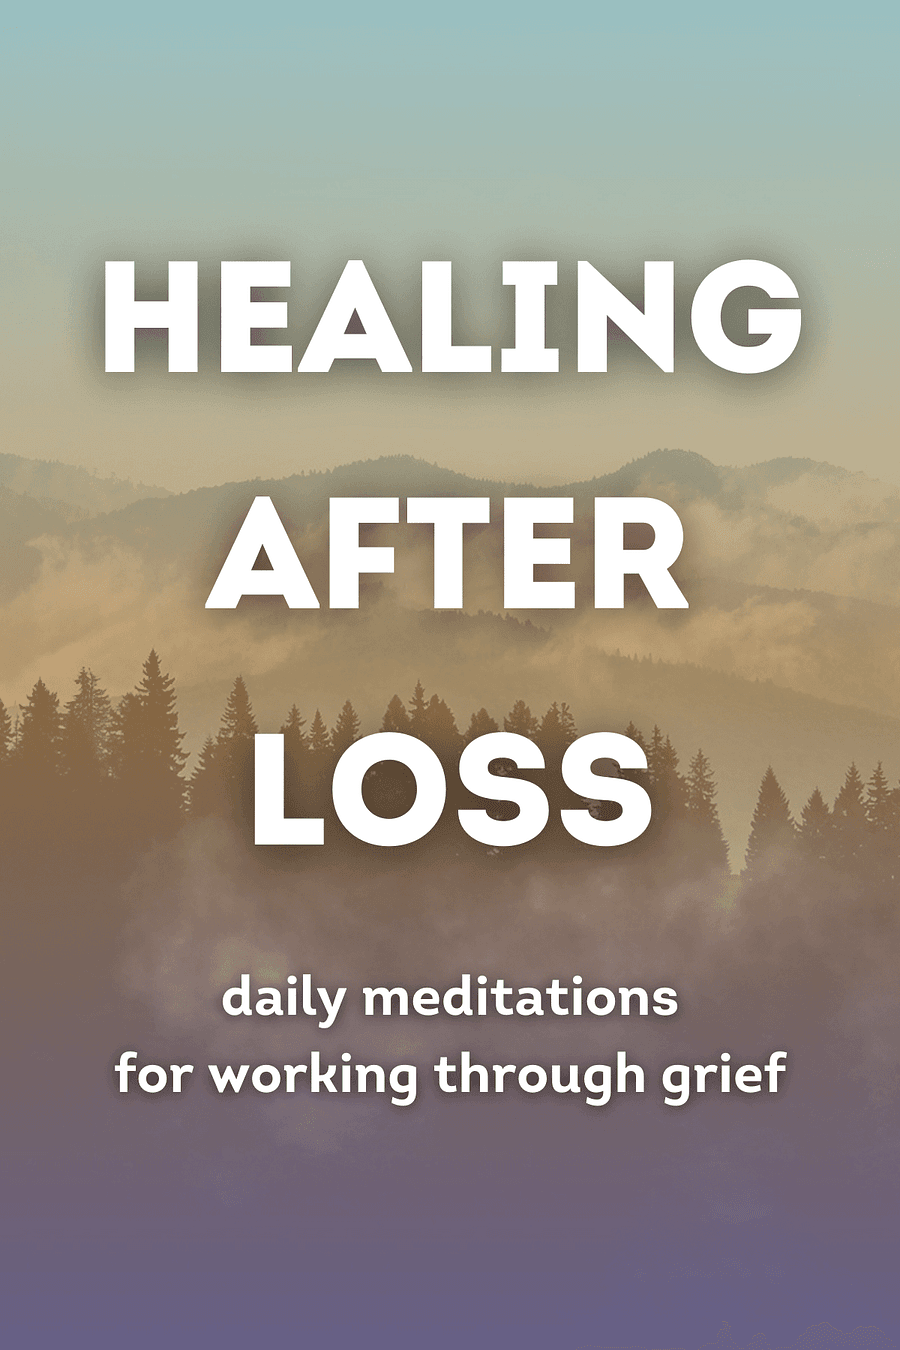 Healing After Loss by Martha W. Hickman - Book Summary